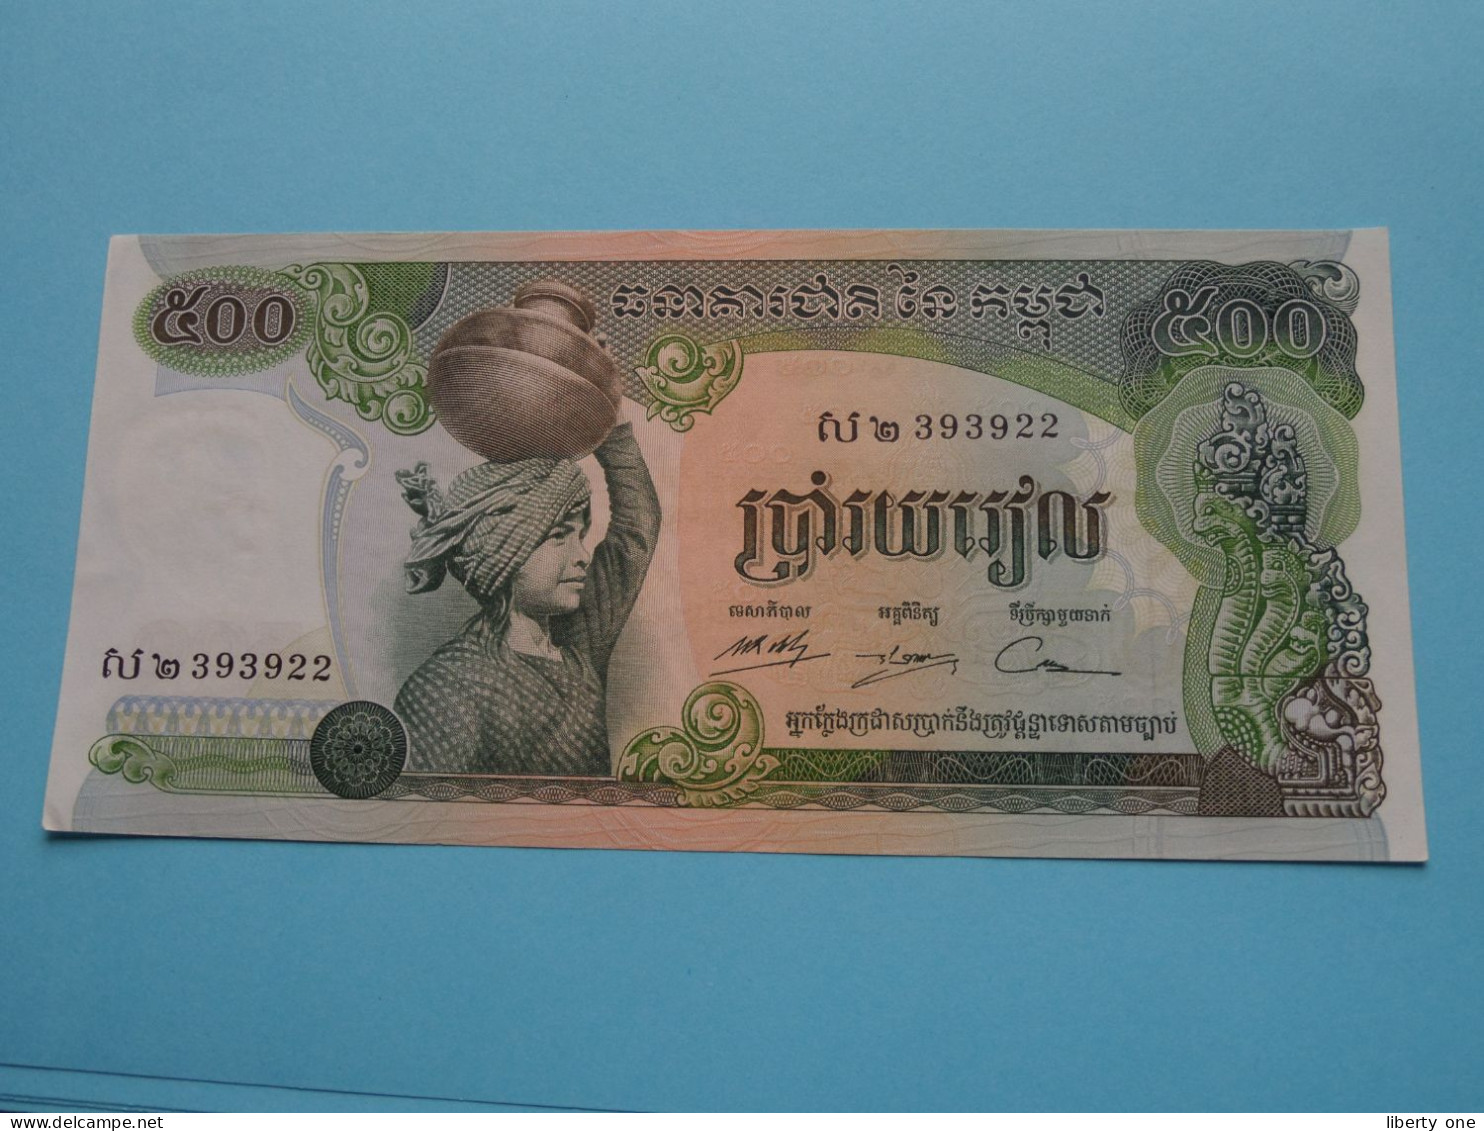 500 Riels () Banque Nationale Du CAMBODGE ( For Grade See SCANS ) UNC ! - Cambodge